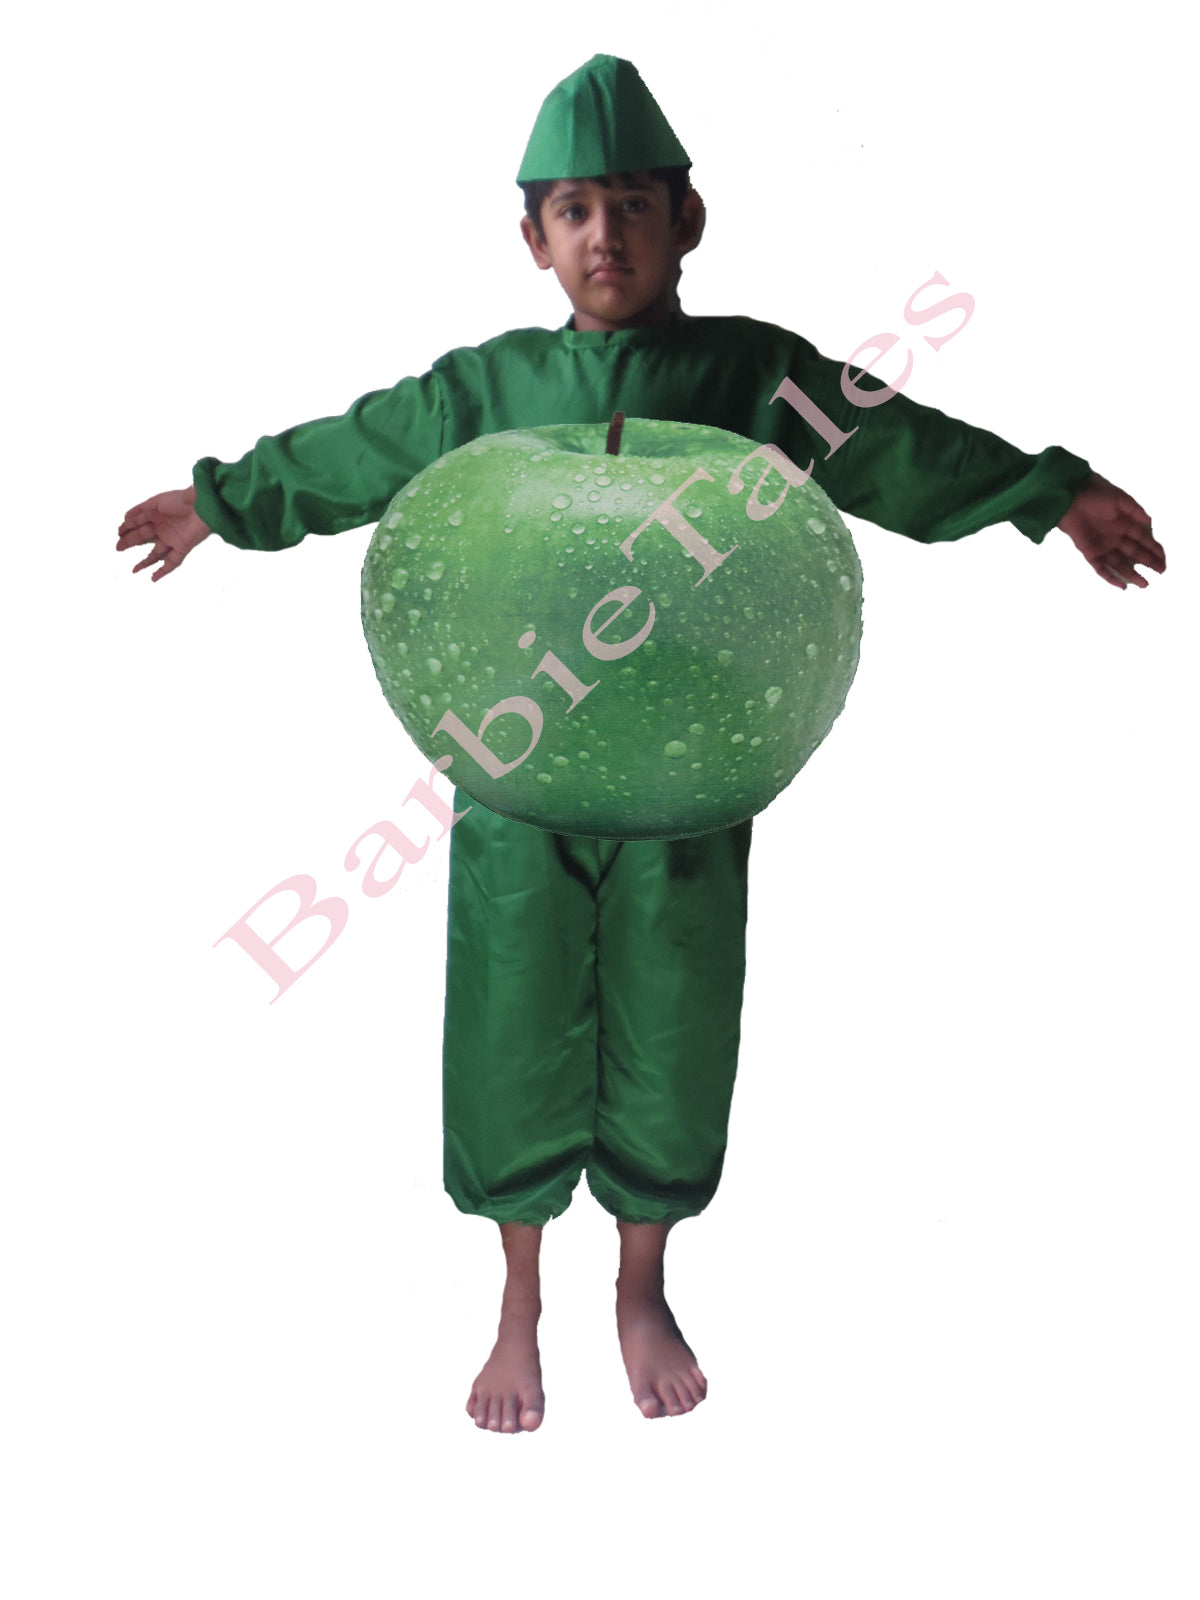 Buy Apple fruit costume online at low price – fancydresswale.com